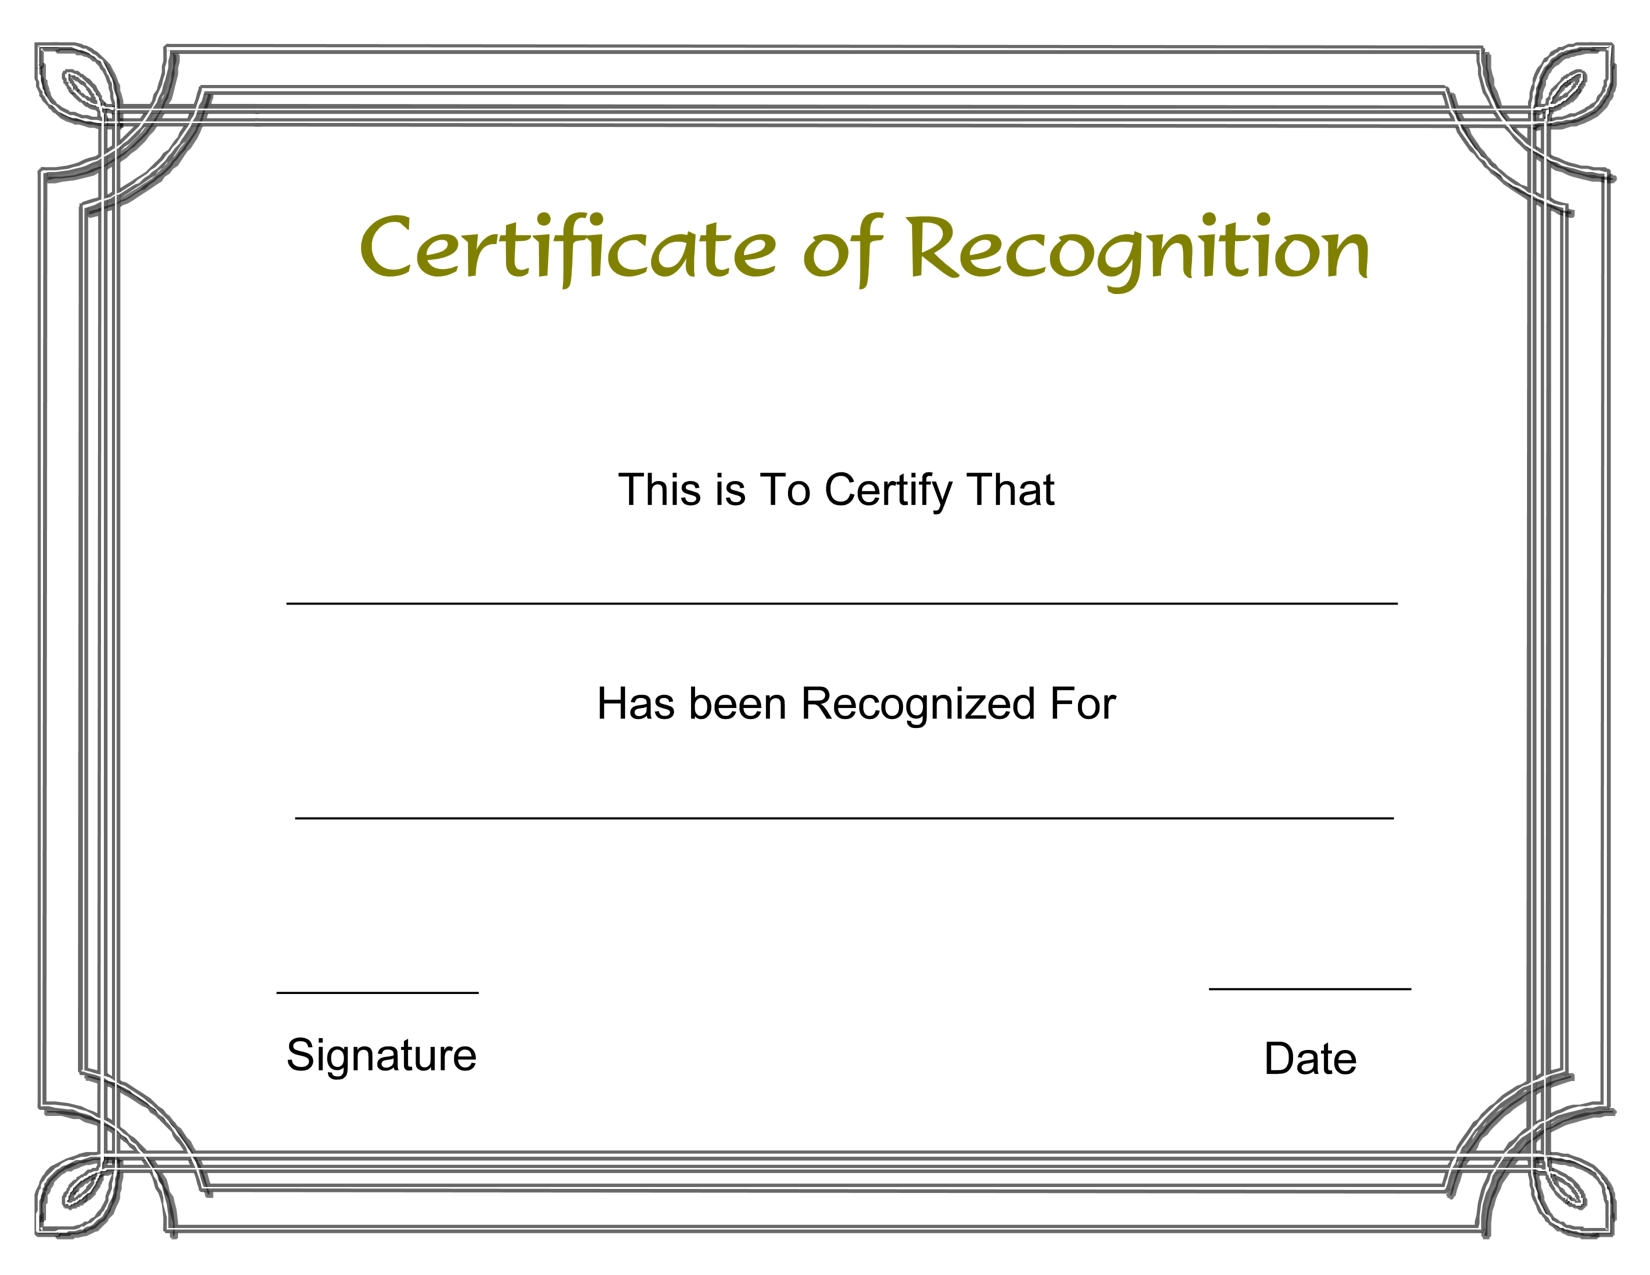 Certificate Template Recognition | Safebest.xyz Intended For Blank Award Certificate Templates Word